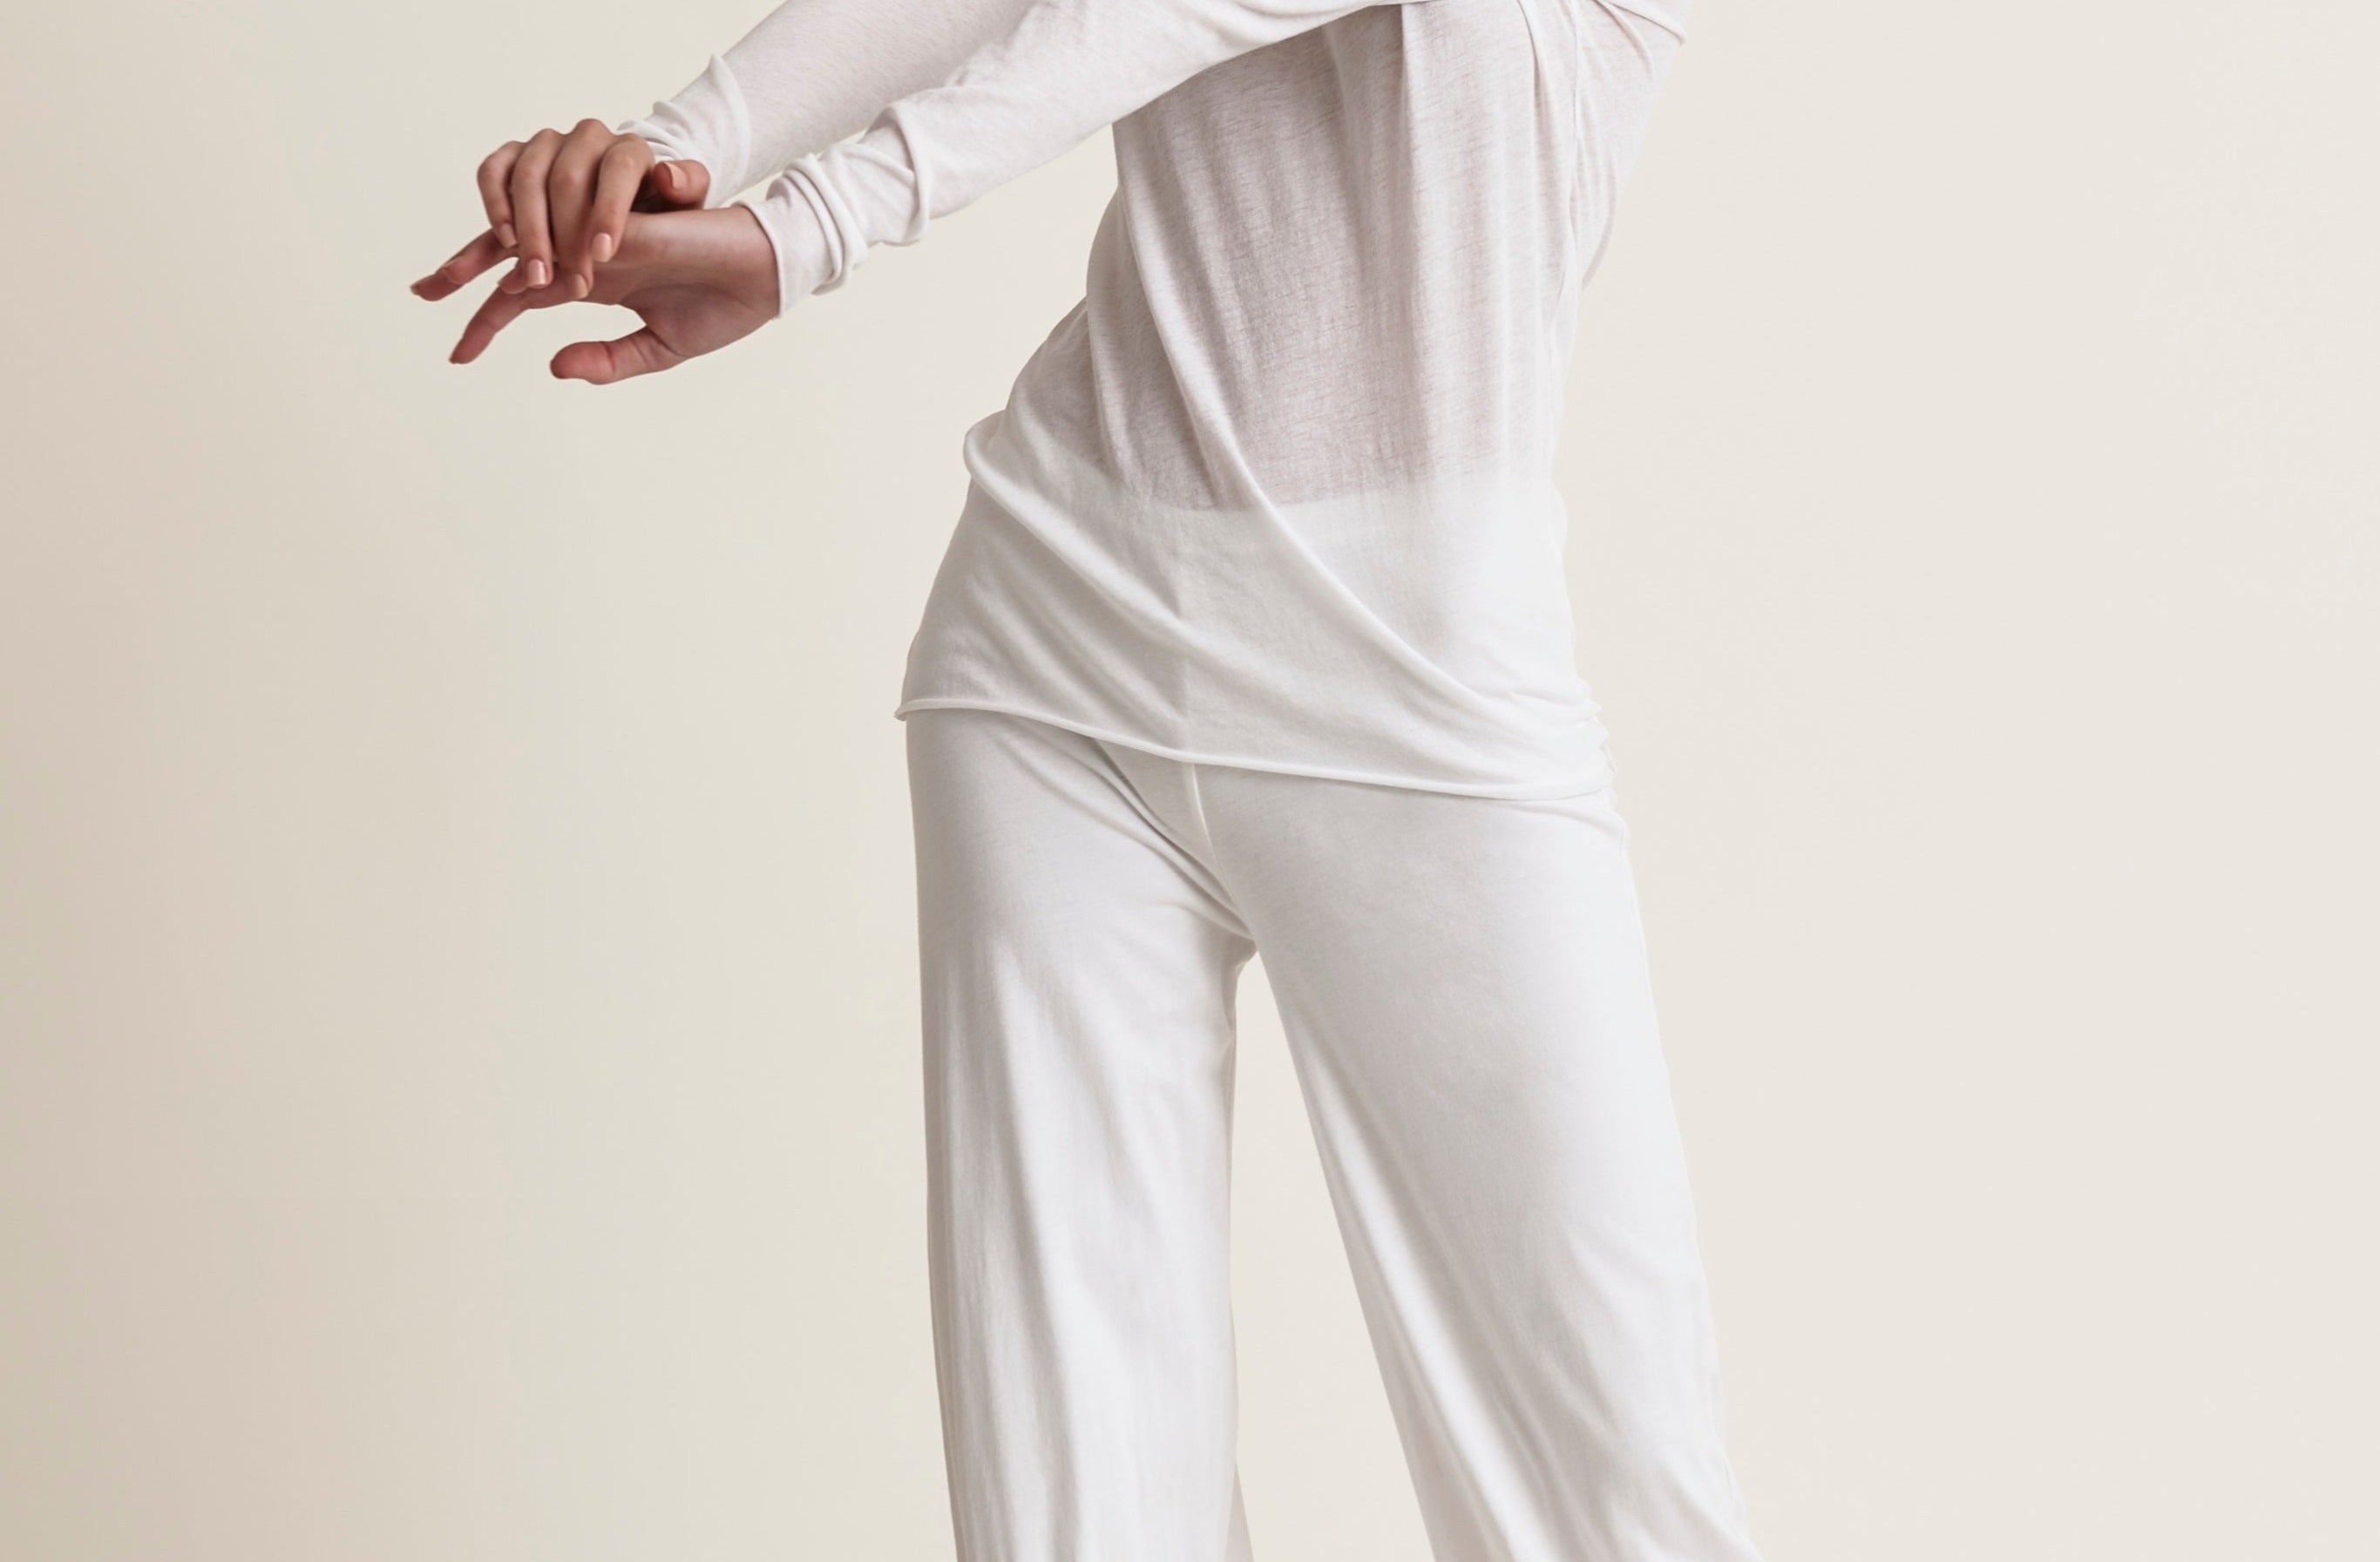 Double Layer Pant – Skin. Addressing the body.